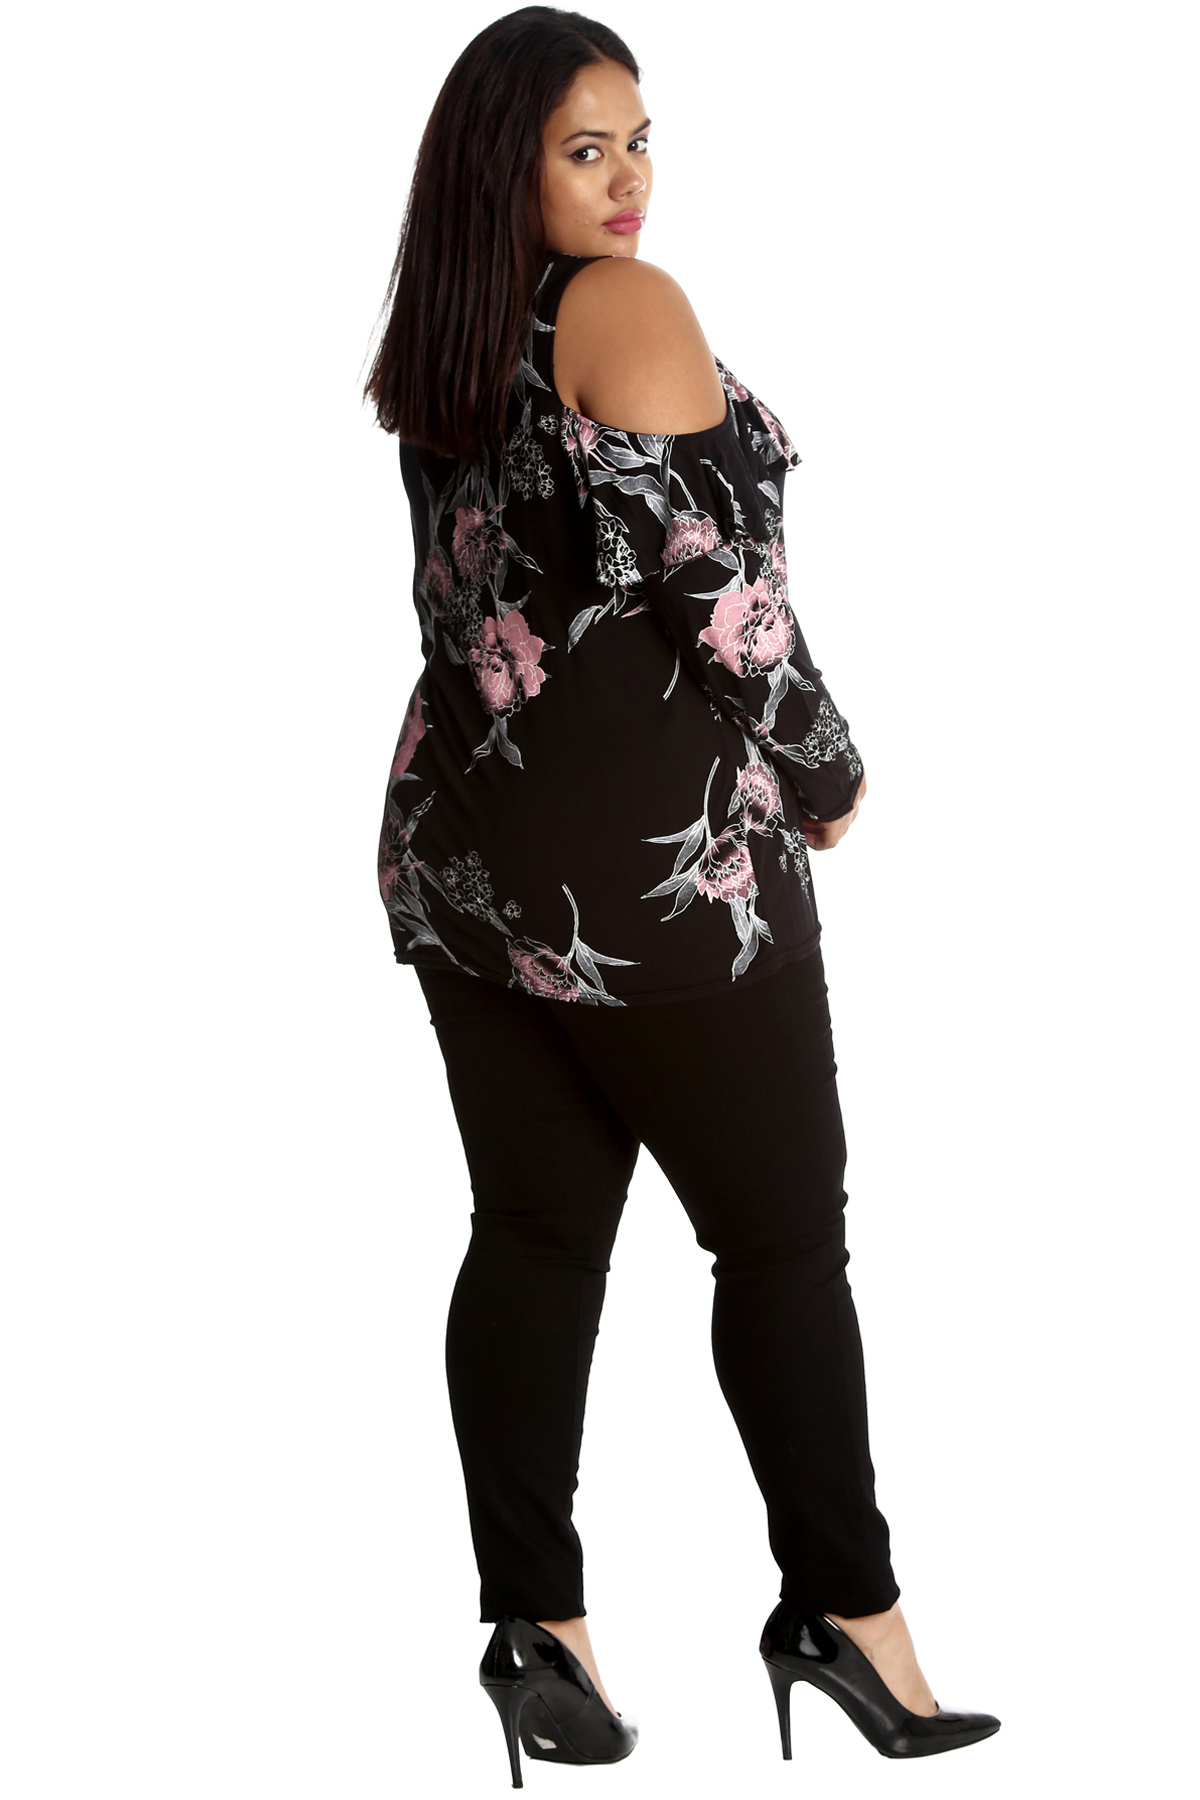 New Ladies Top Plus Size Womens Floral Cold Shoulder Frill Neck Tunic ...